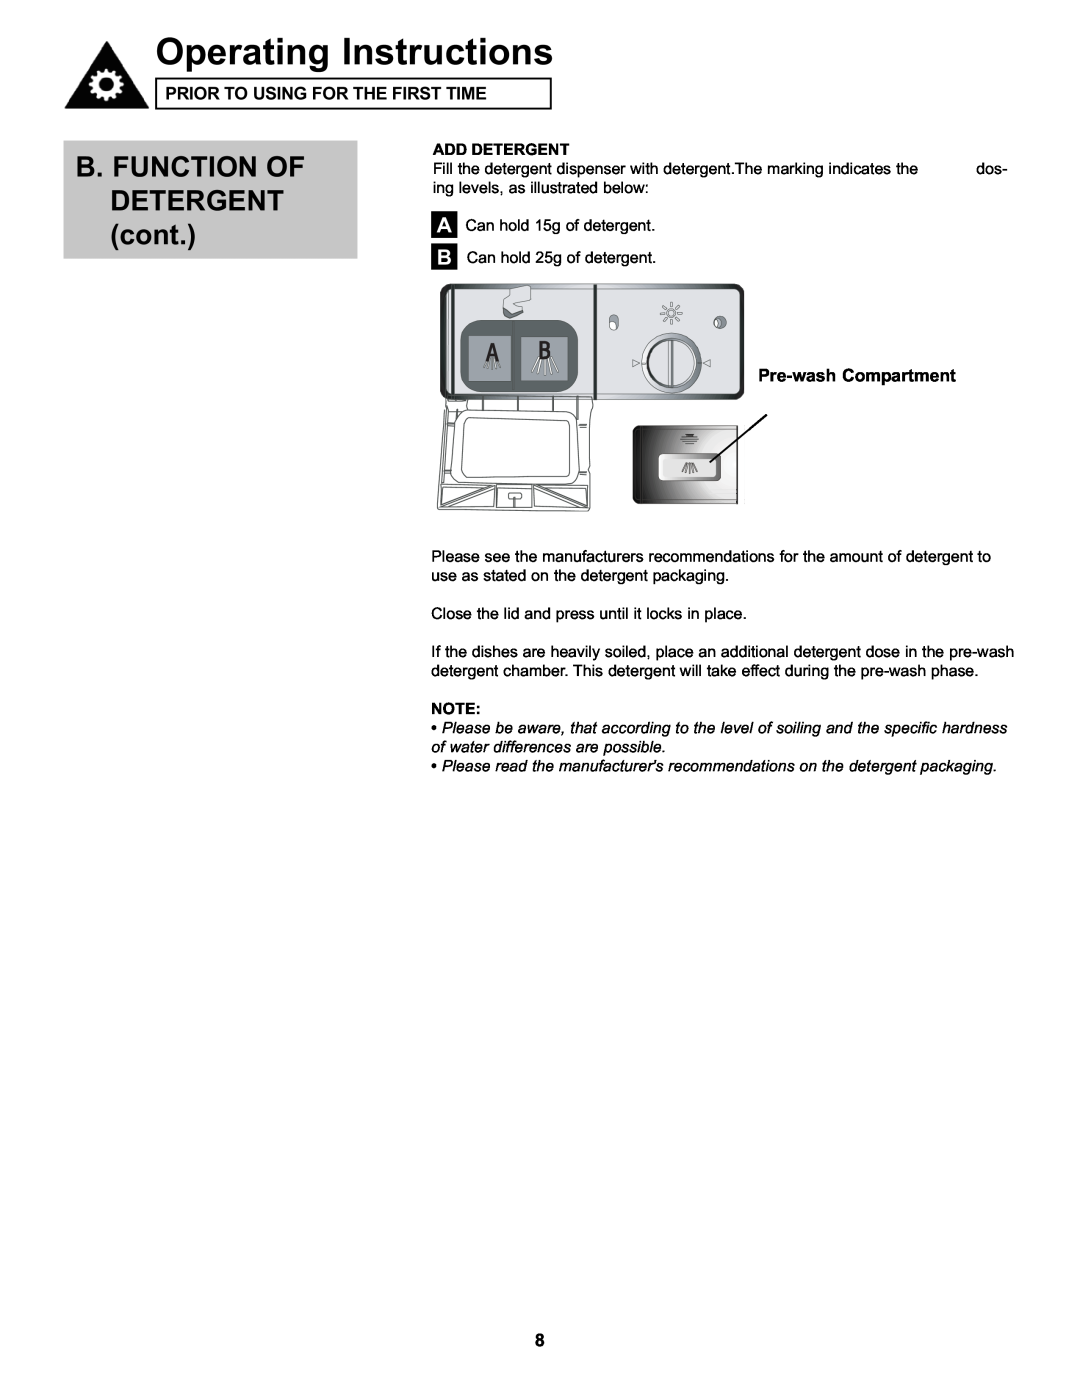 Danby DDW611WLED manual Operating Instructions, B. FUNCTION OF DETERGENT cont, Add Detergent 